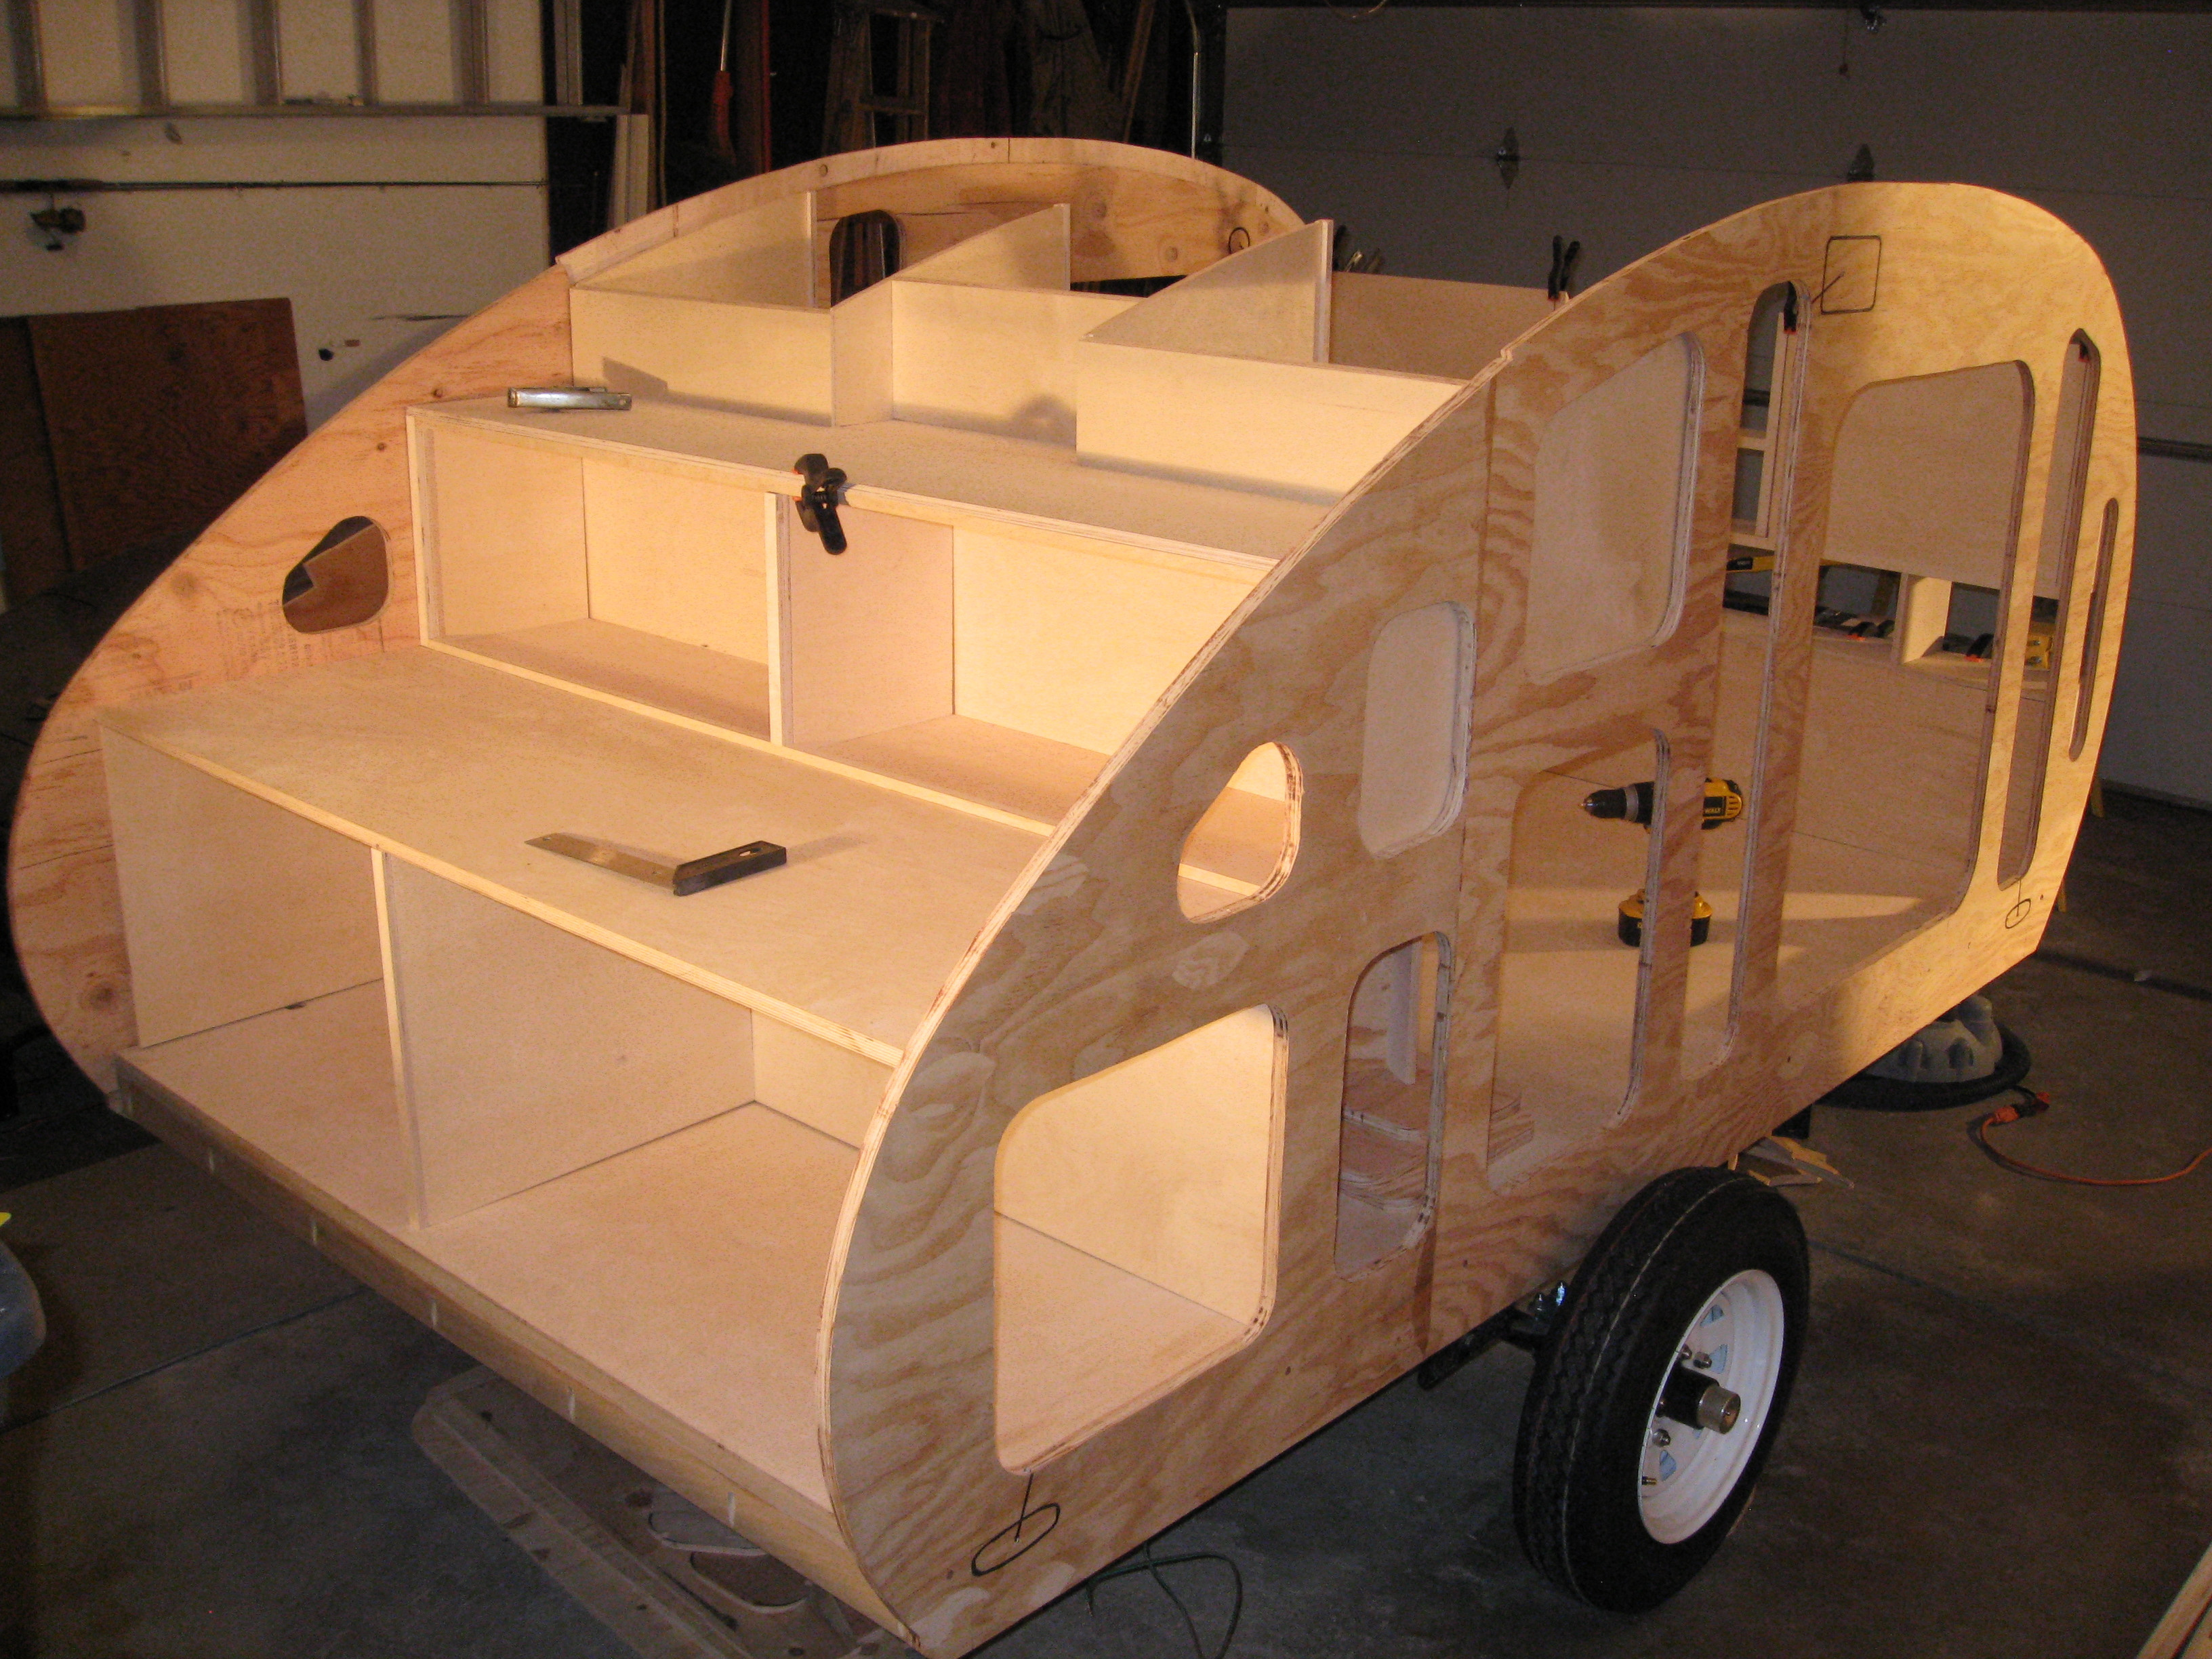 DIY Camping Trailer Plans
 A Gorgeous DIY Teardrop Trailer Called The Wyoming Woody